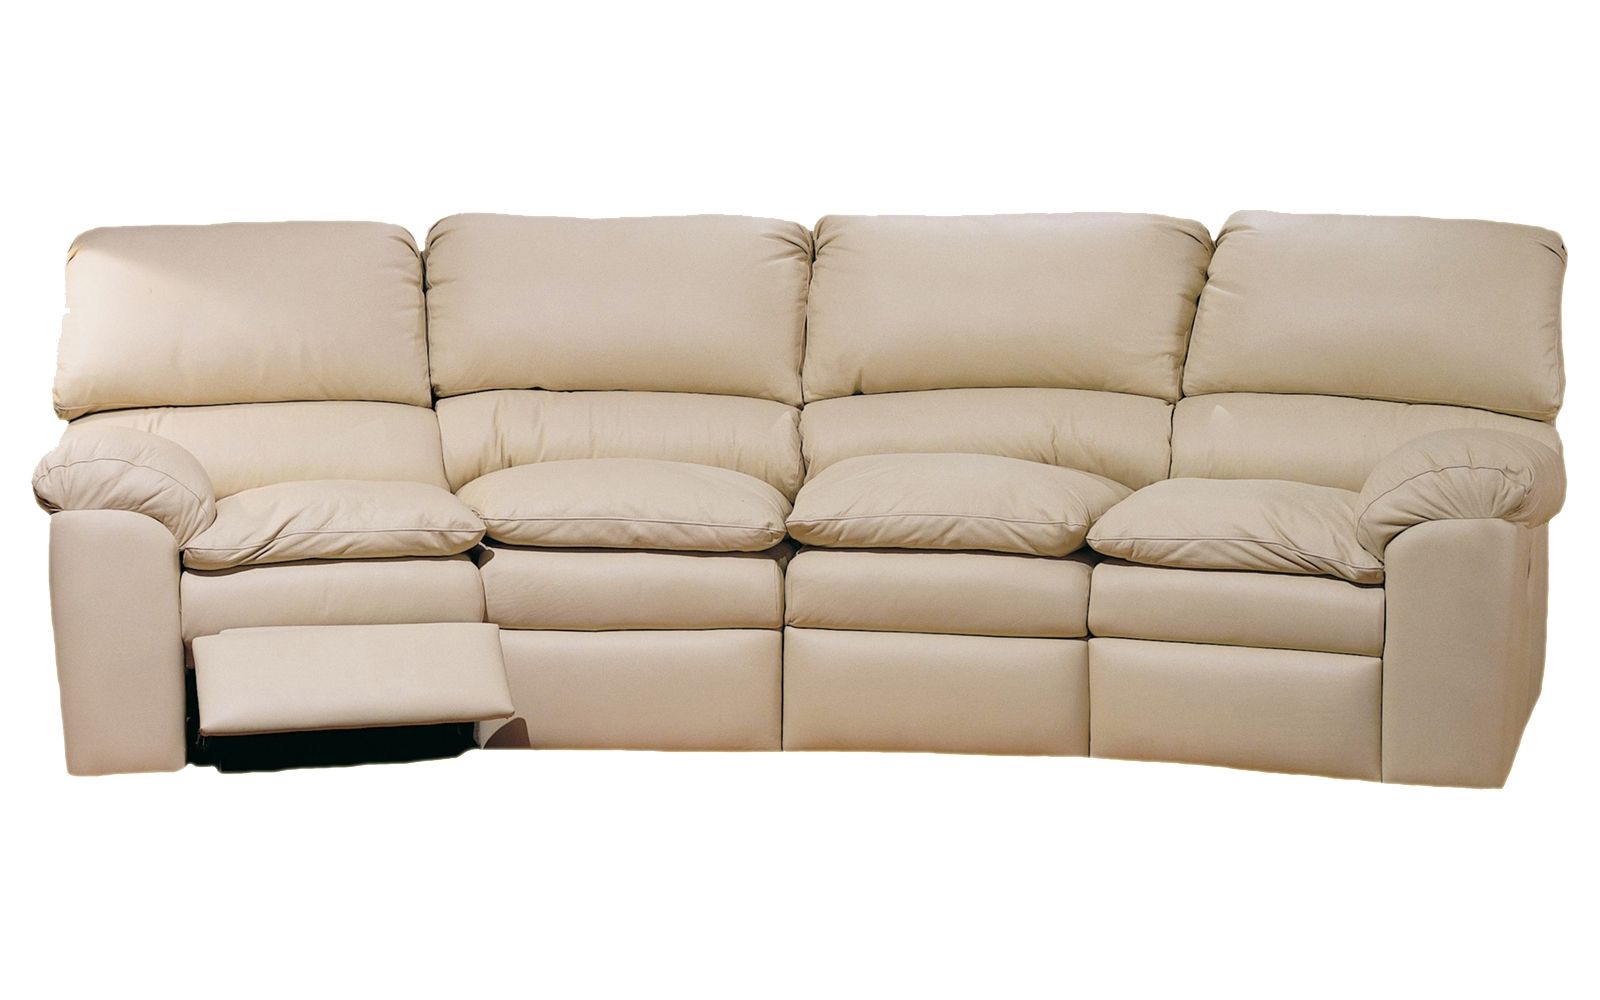 Catera 4 Seat Conversation Sofa Arizona Leather Interiors With 4 Seat Couch (View 9 of 15)